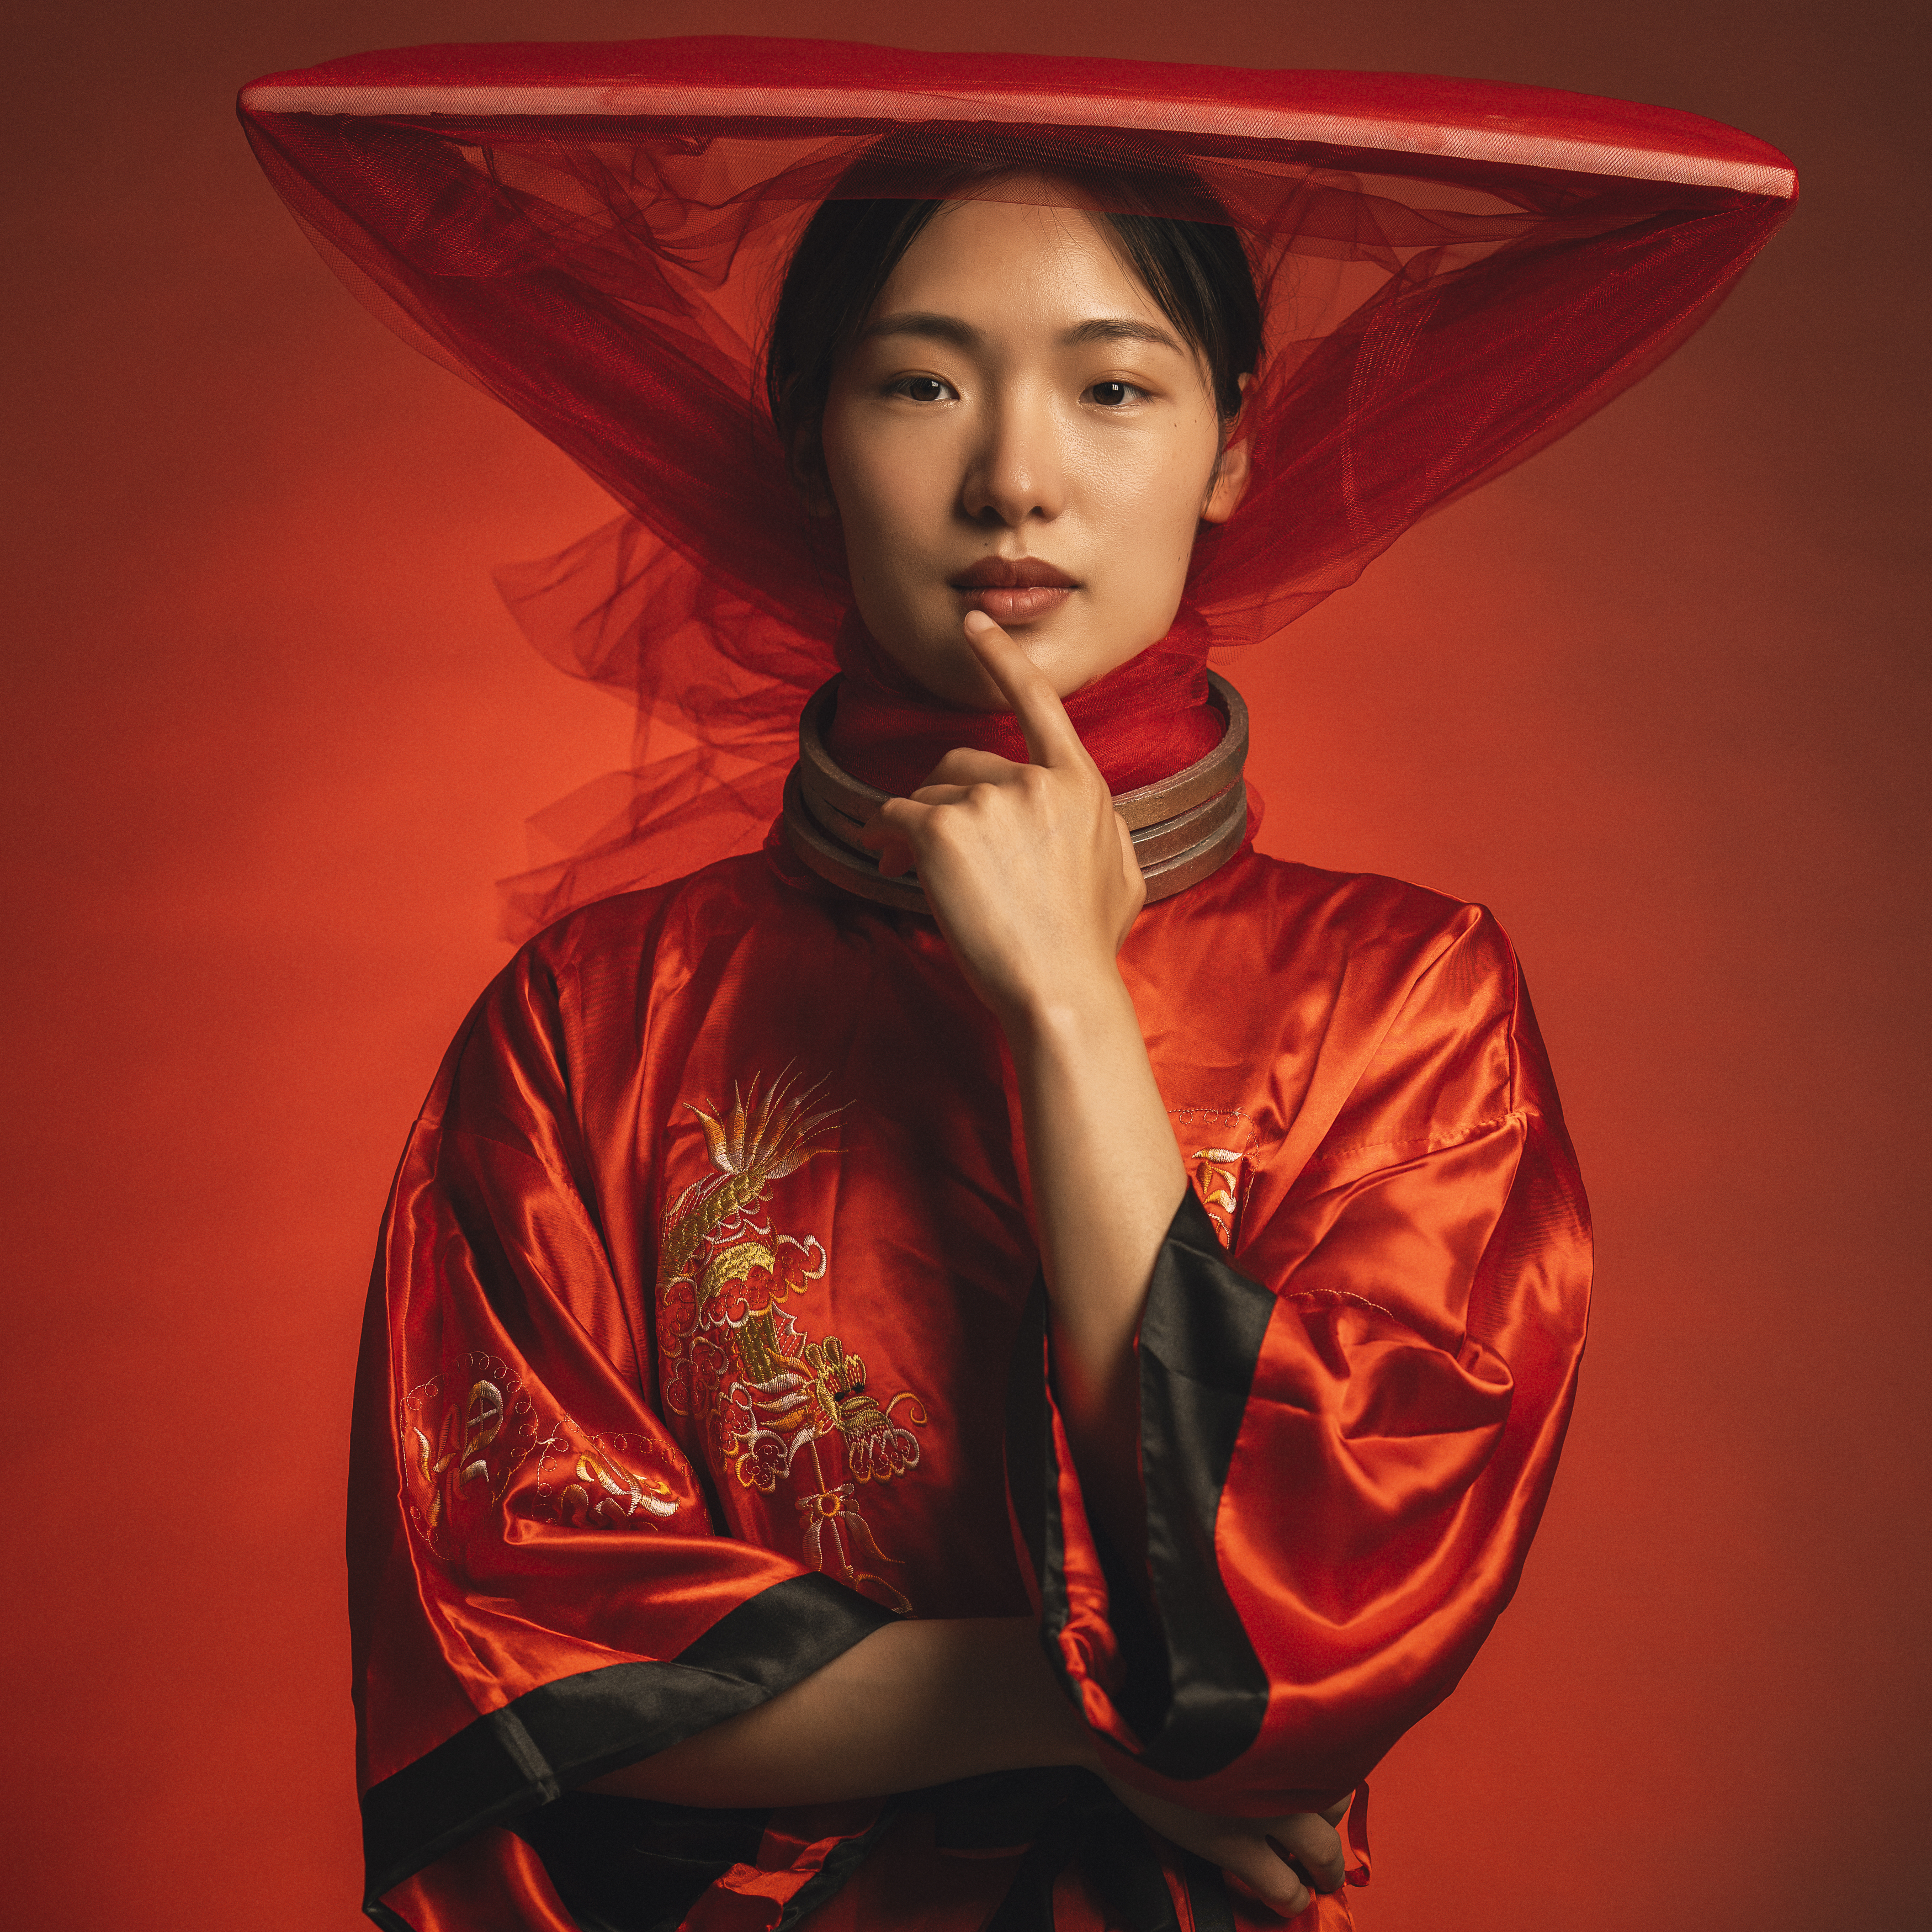 beautiful woman, beauty, chinese girl, dreaminess, dress, elegance, fashion, female, femininity, front view, hat, human face, individuality, indoors, lifestyles, looking at camera, one person, portrait, pose, studio shot, traditional clothing, young woman, Alex Tsarfin